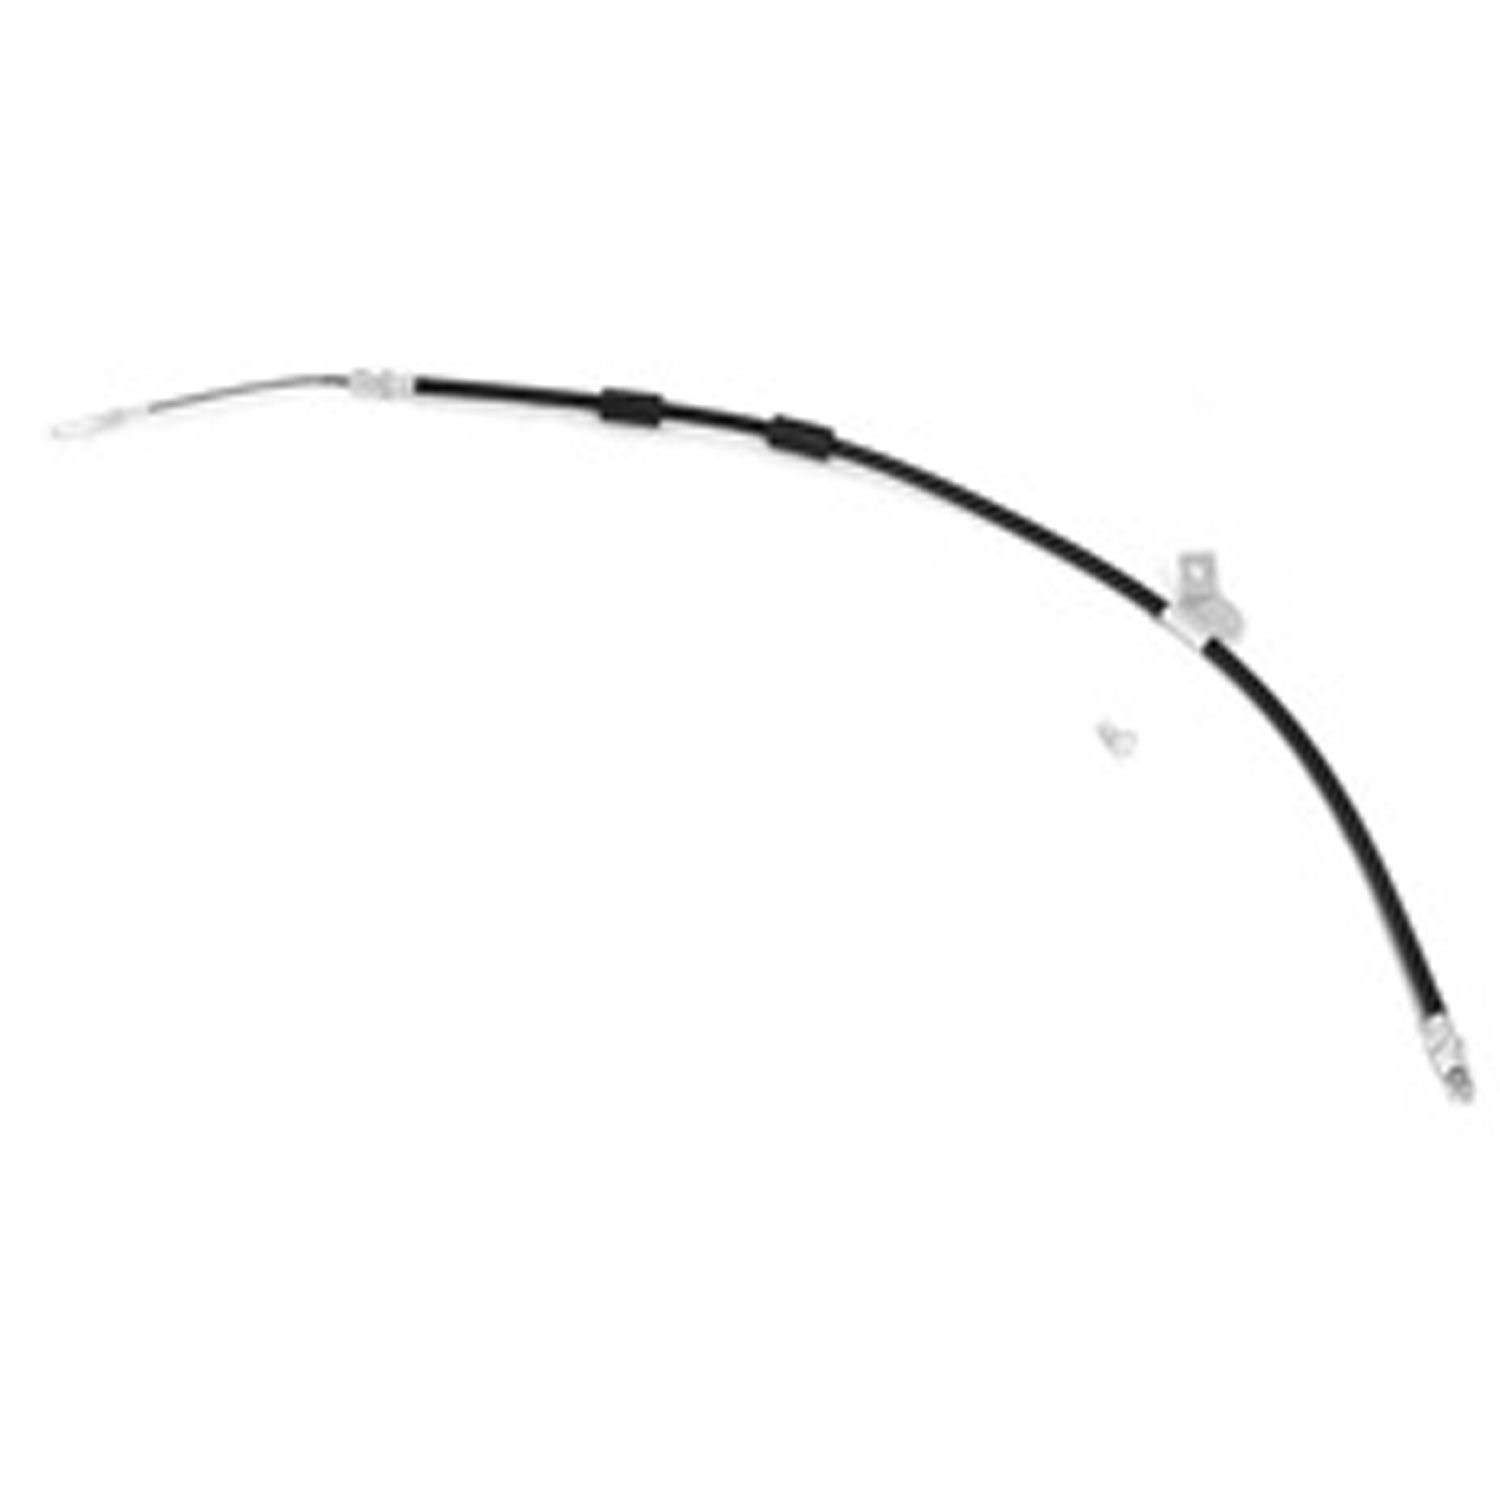 Replacement Left Rear Brake Hose For 1999-2004 Jeep